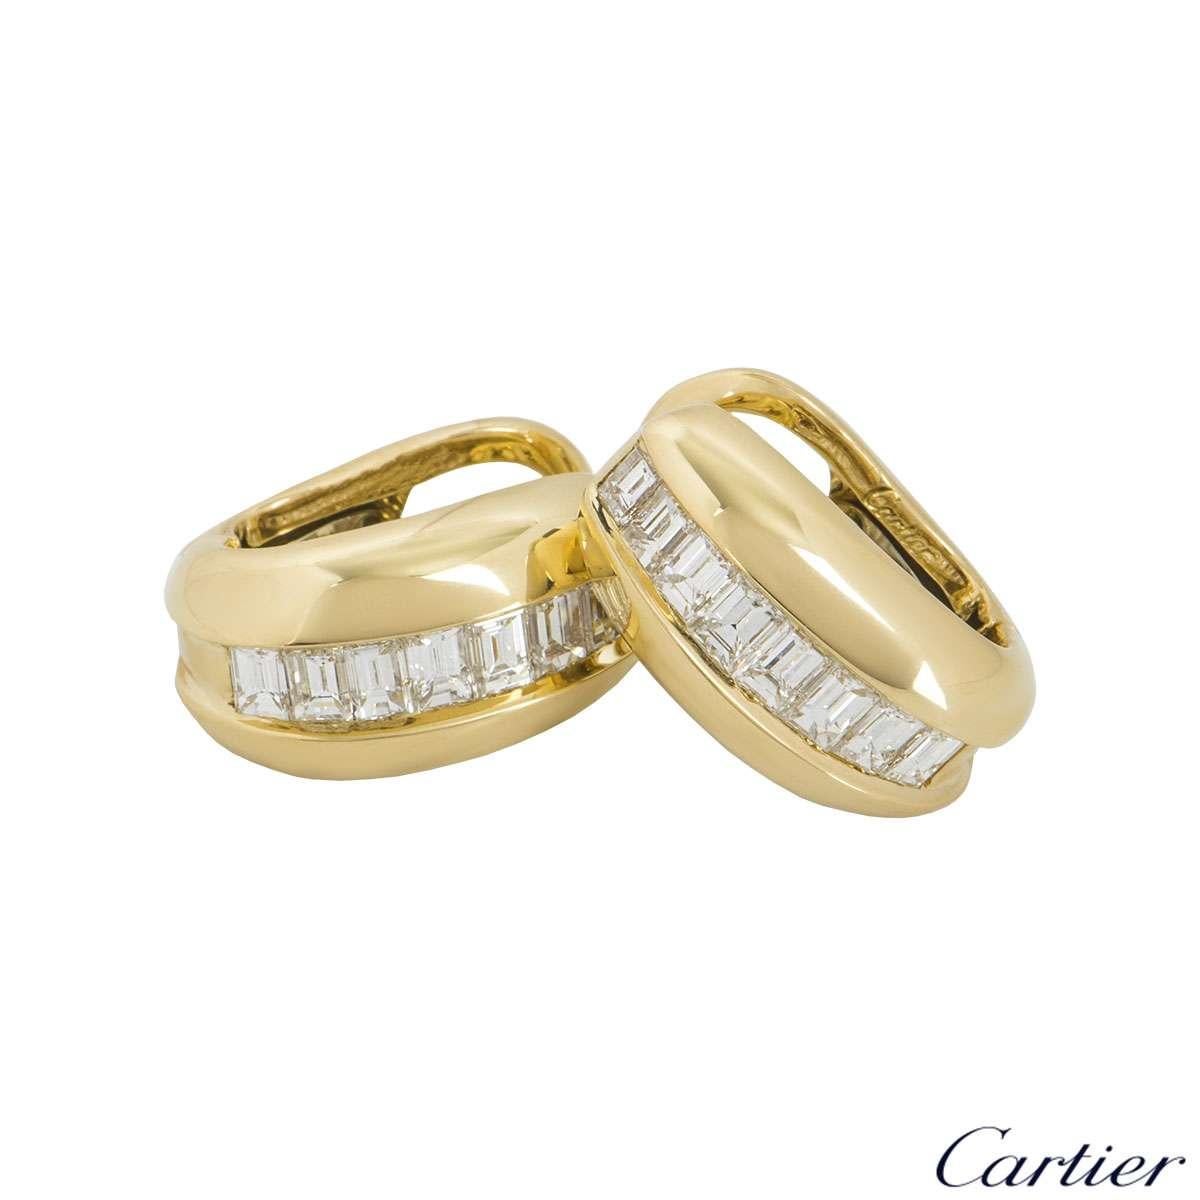 Cartier Yellow Gold Bombe Diamond Earrings 1.44 Carat In Excellent Condition In London, GB